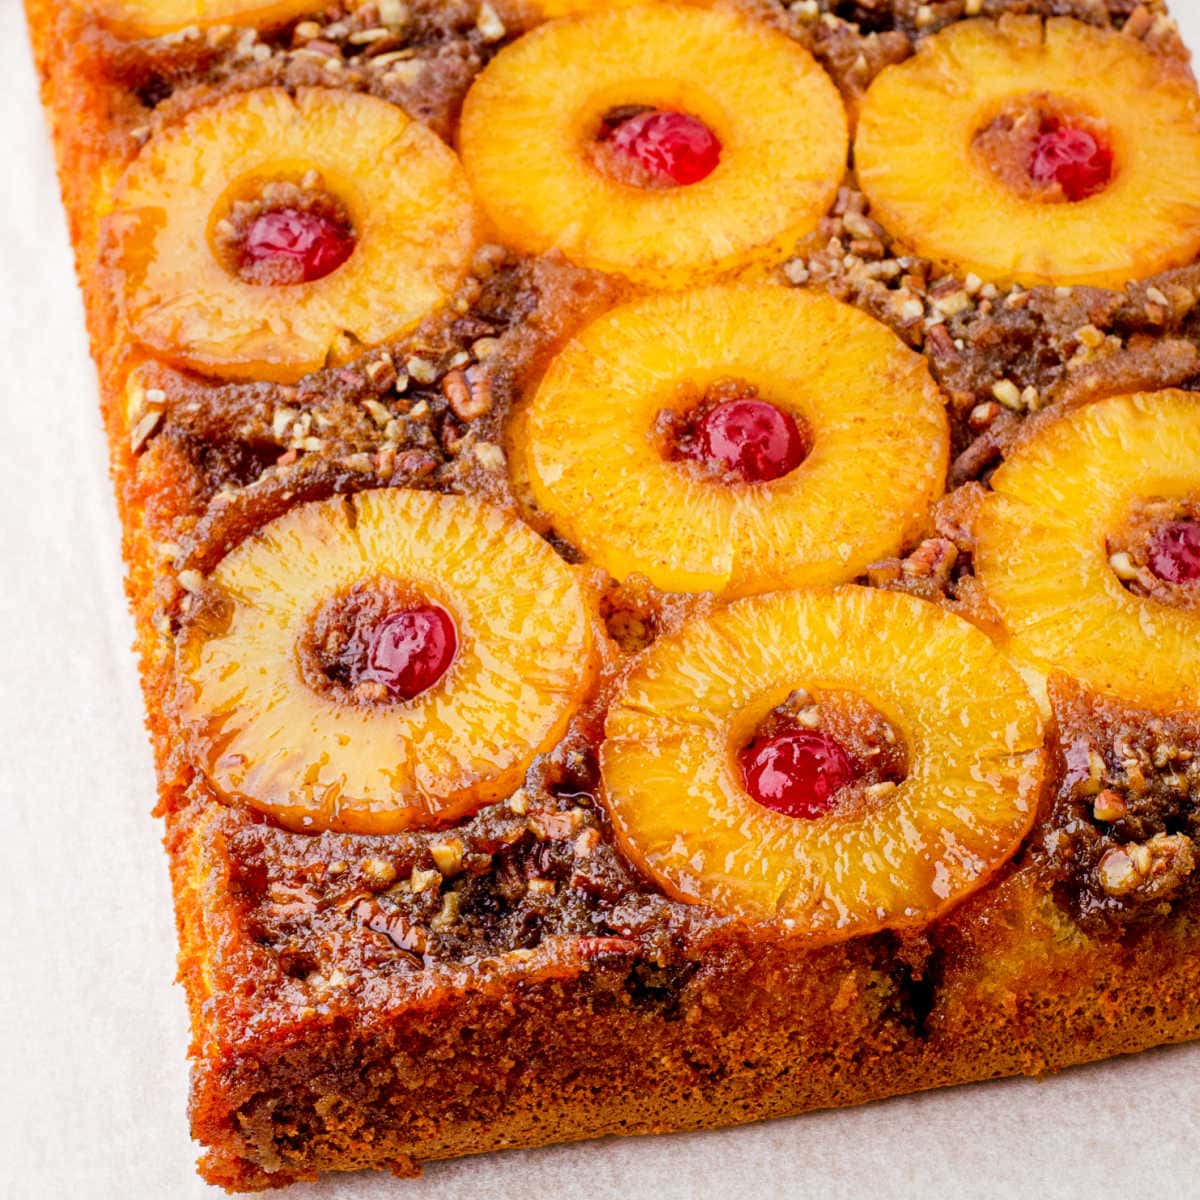 Feature image for the pineapple upside down cake recipe.